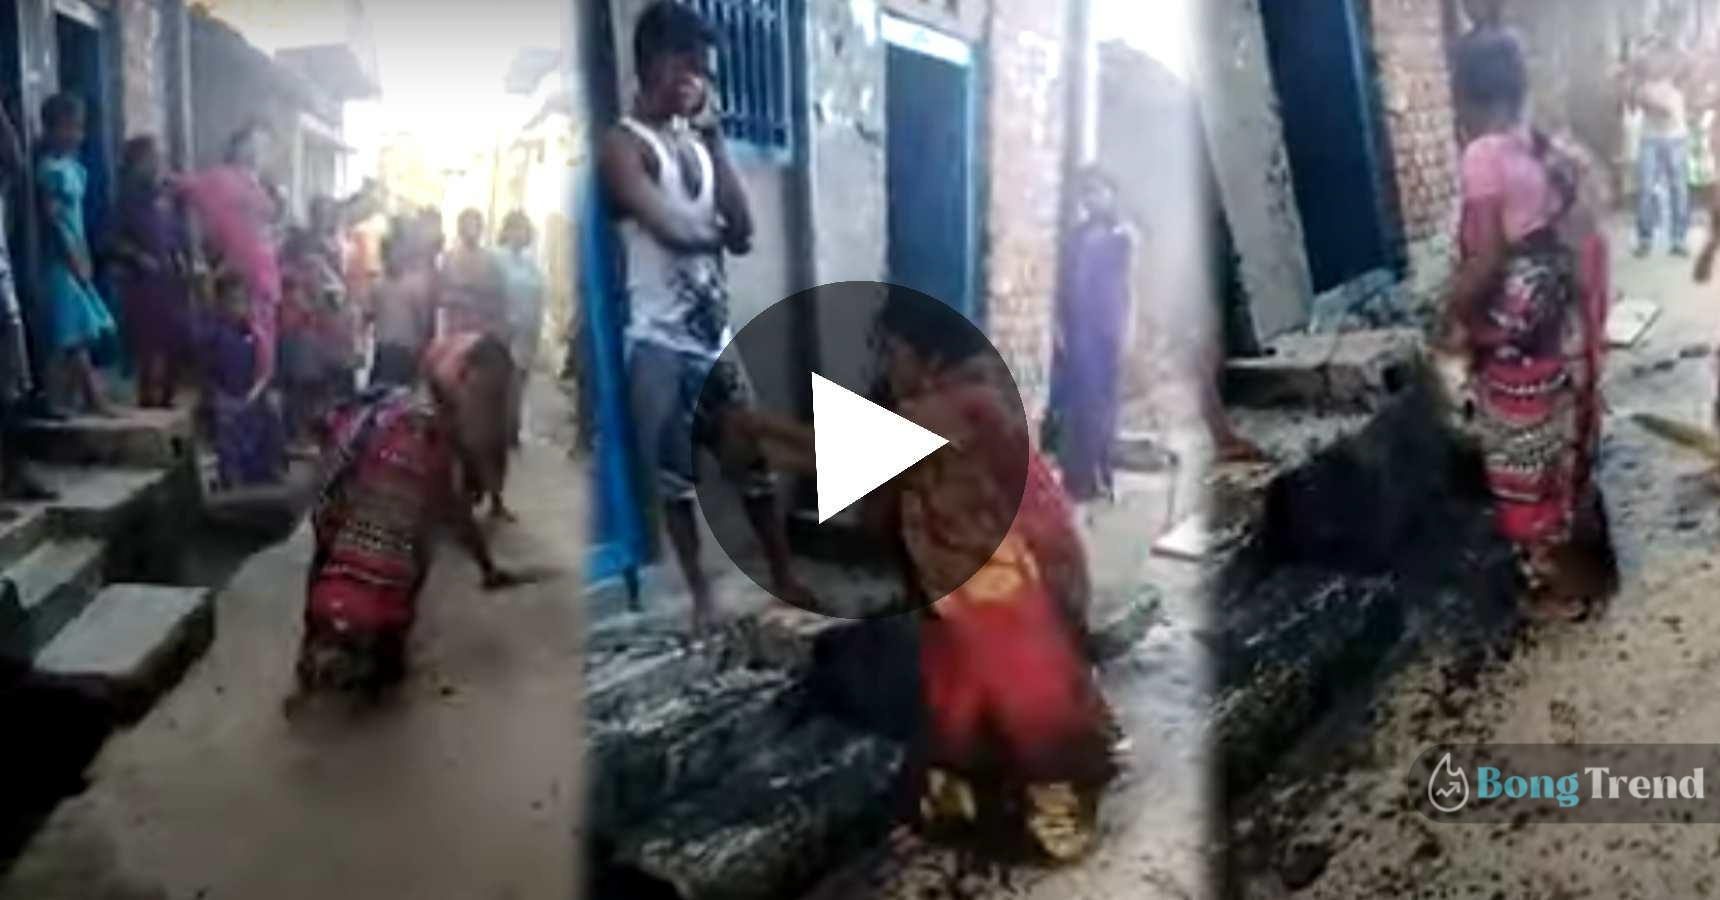 Two women trowing garbage from drain viral quarell video